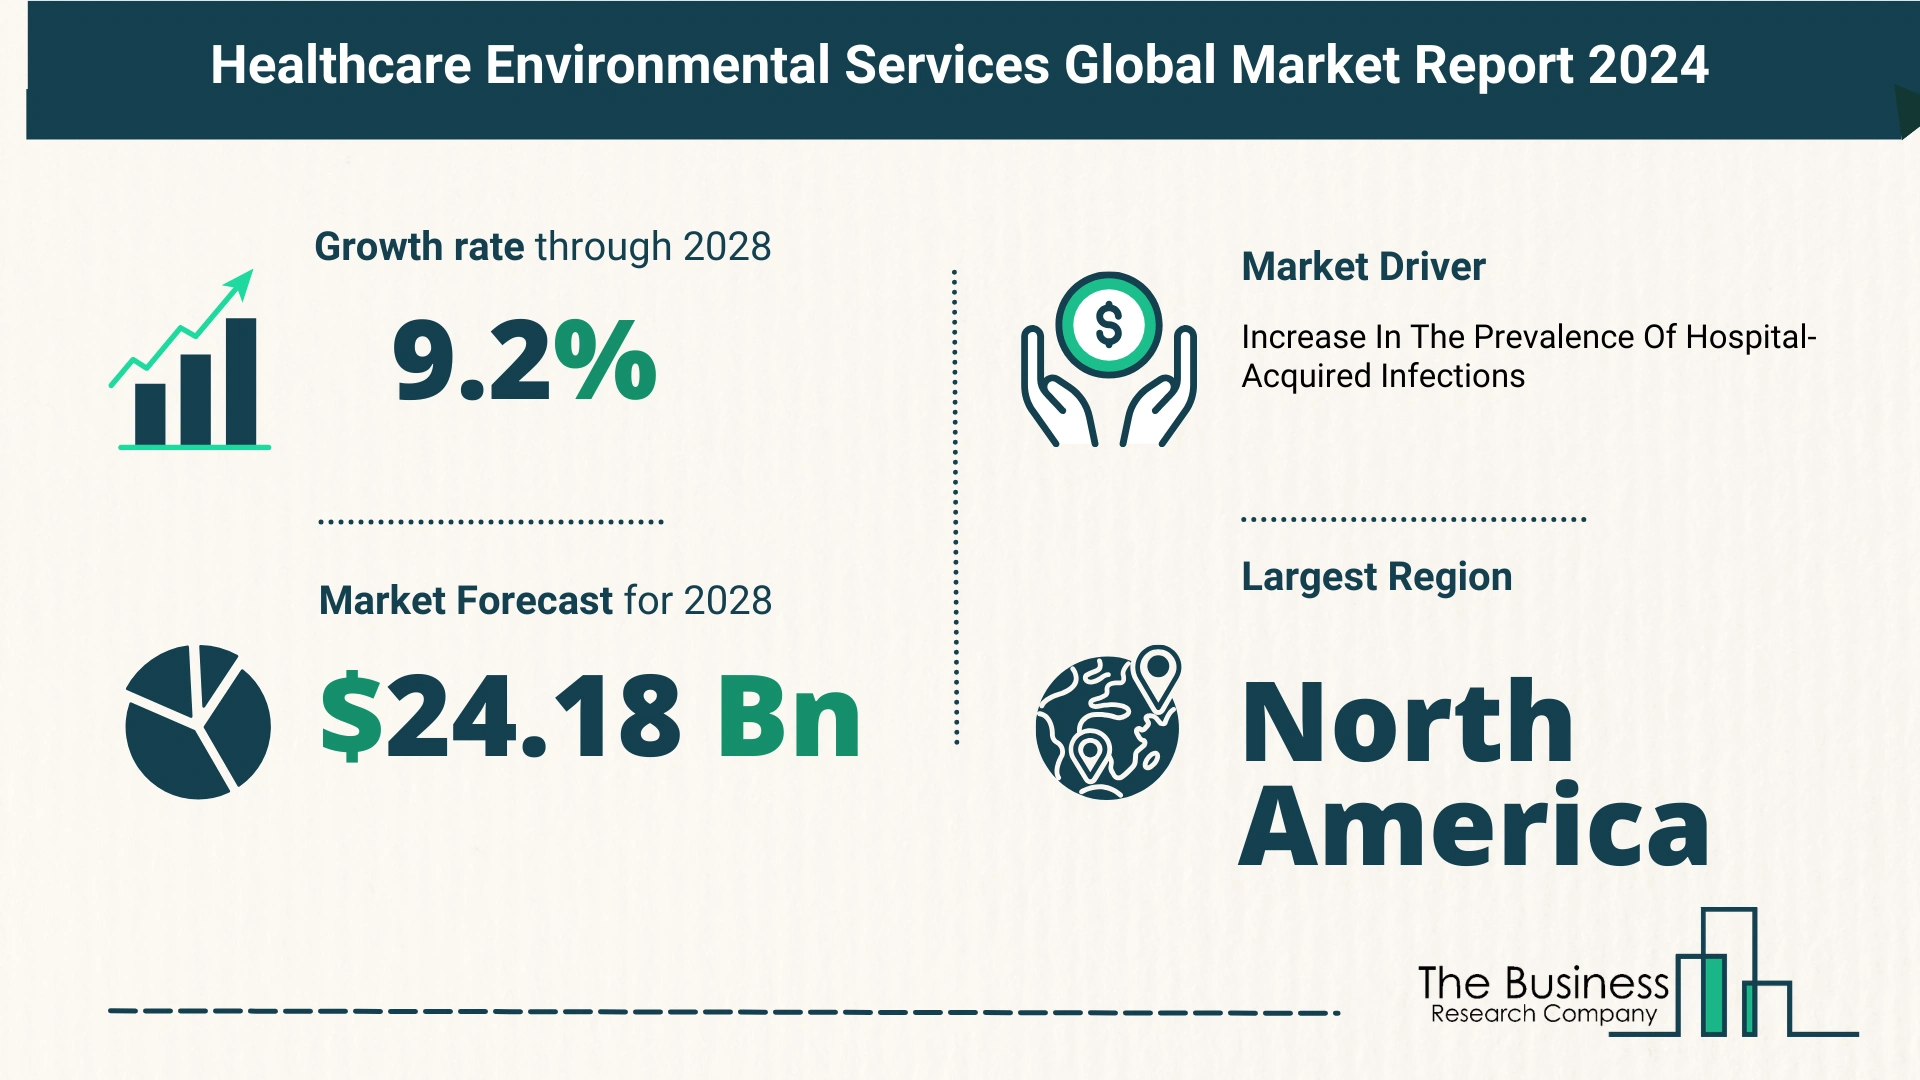 5 Key Insights On The Healthcare Environmental Services Market 2024